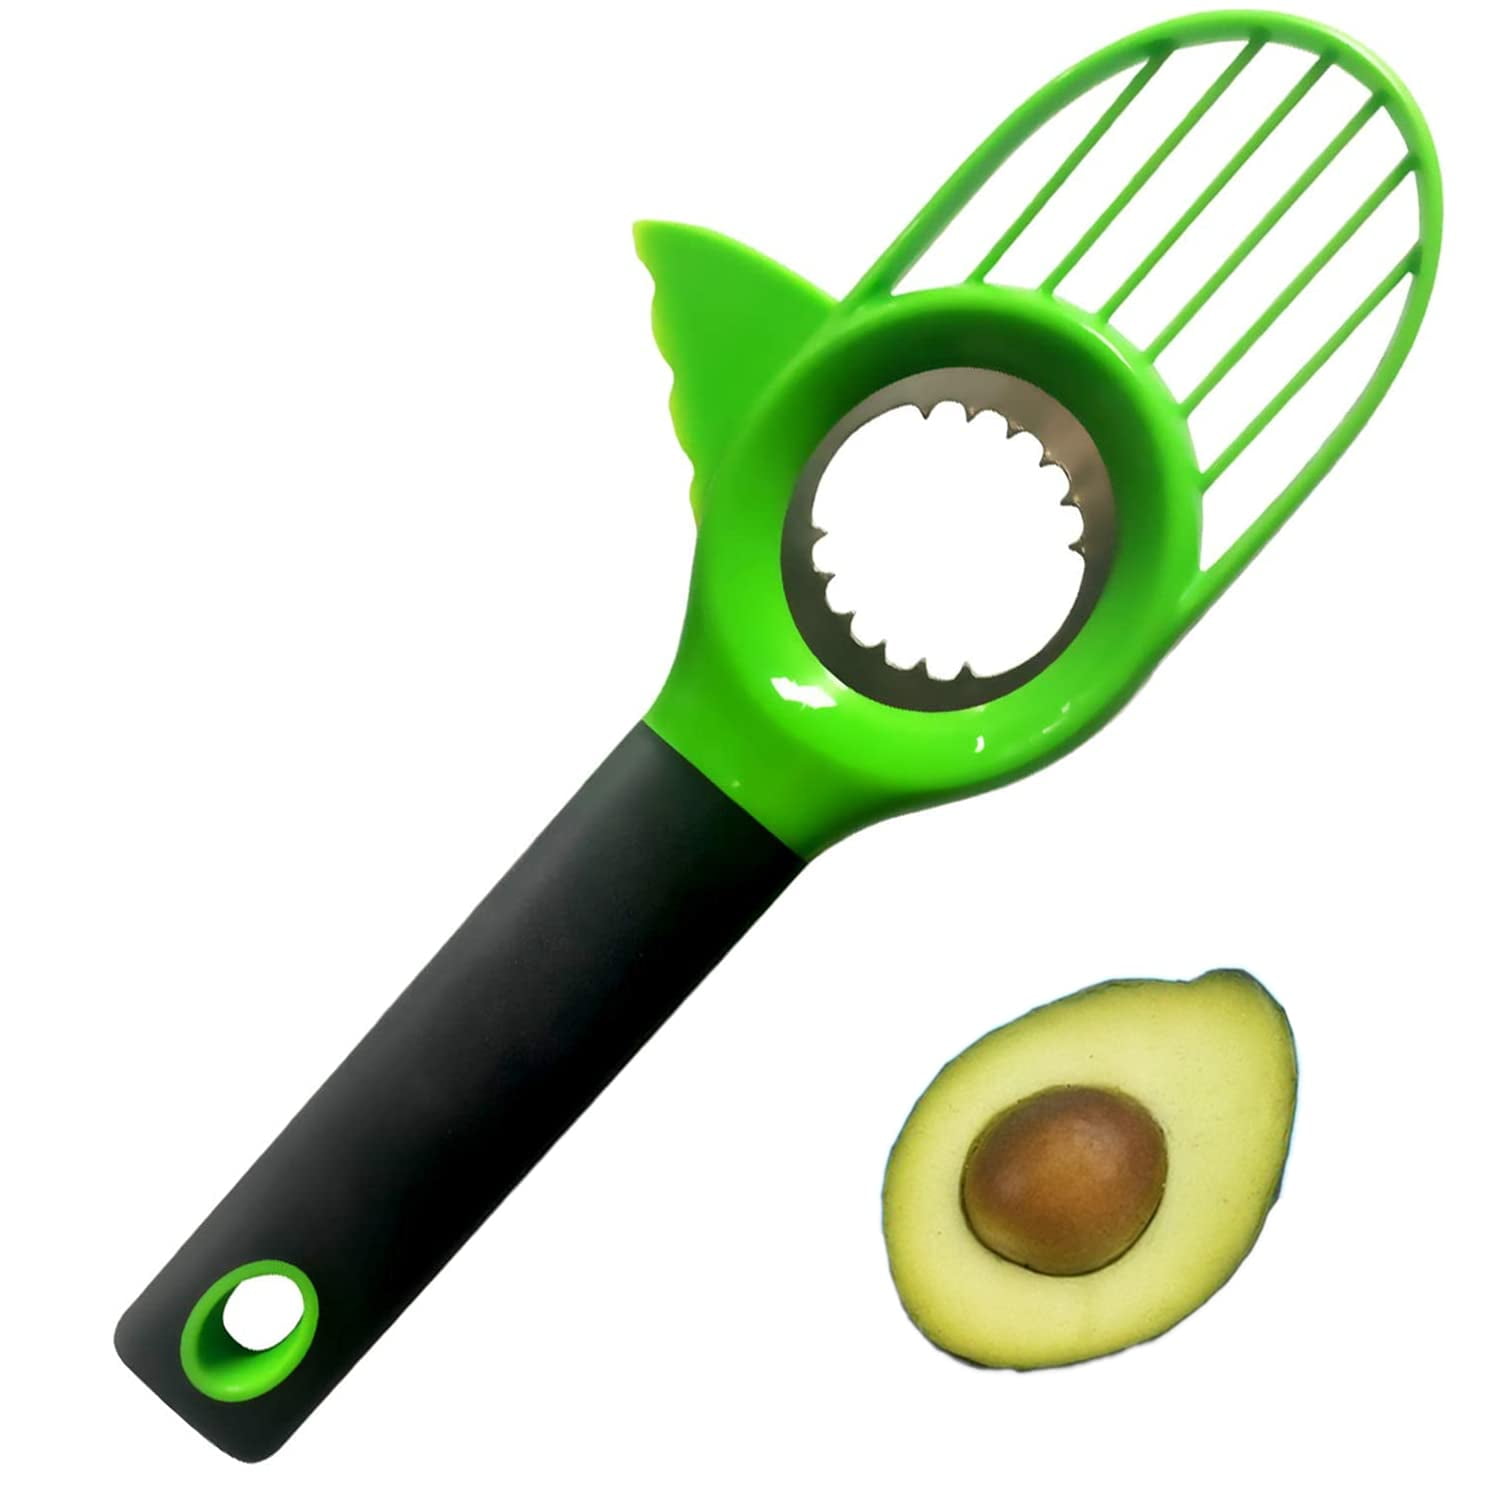 Avocado Cutter Slicer and Pitter 3 in 1, Avocado Tool with Silicon